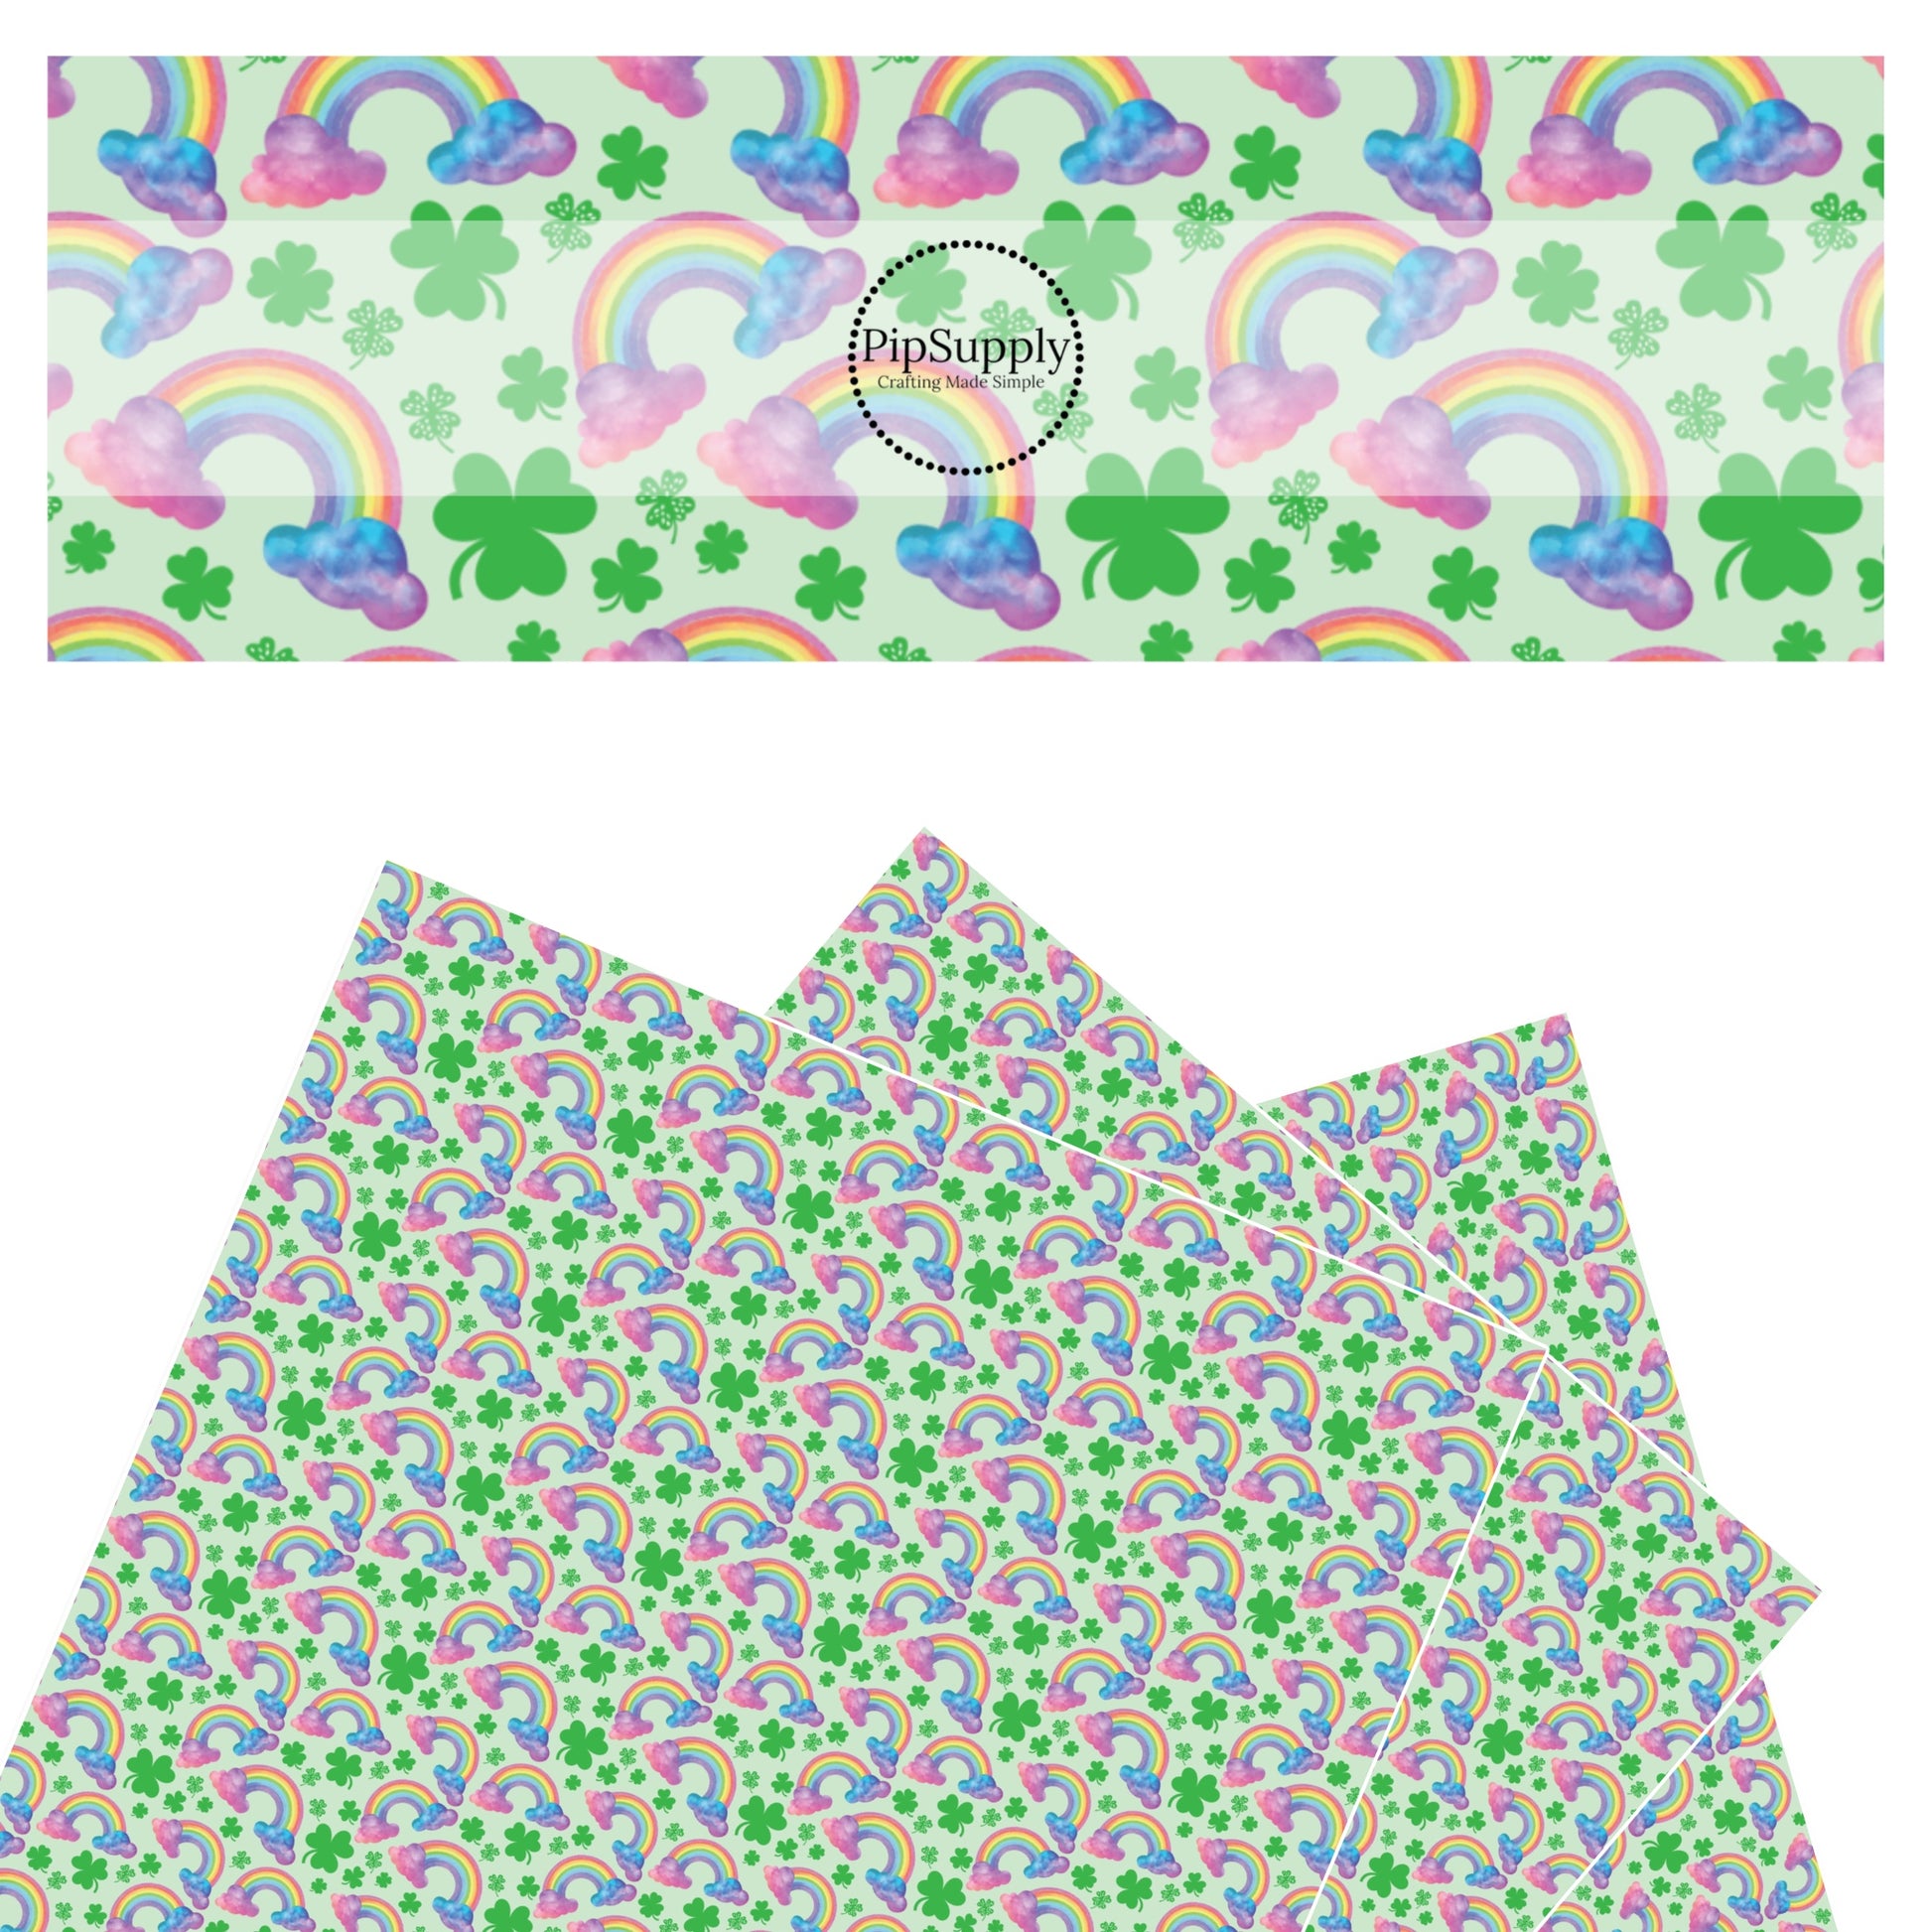 Colorful rainbows with pink and blue watercolor clouds with green clovers on green faux leather sheets